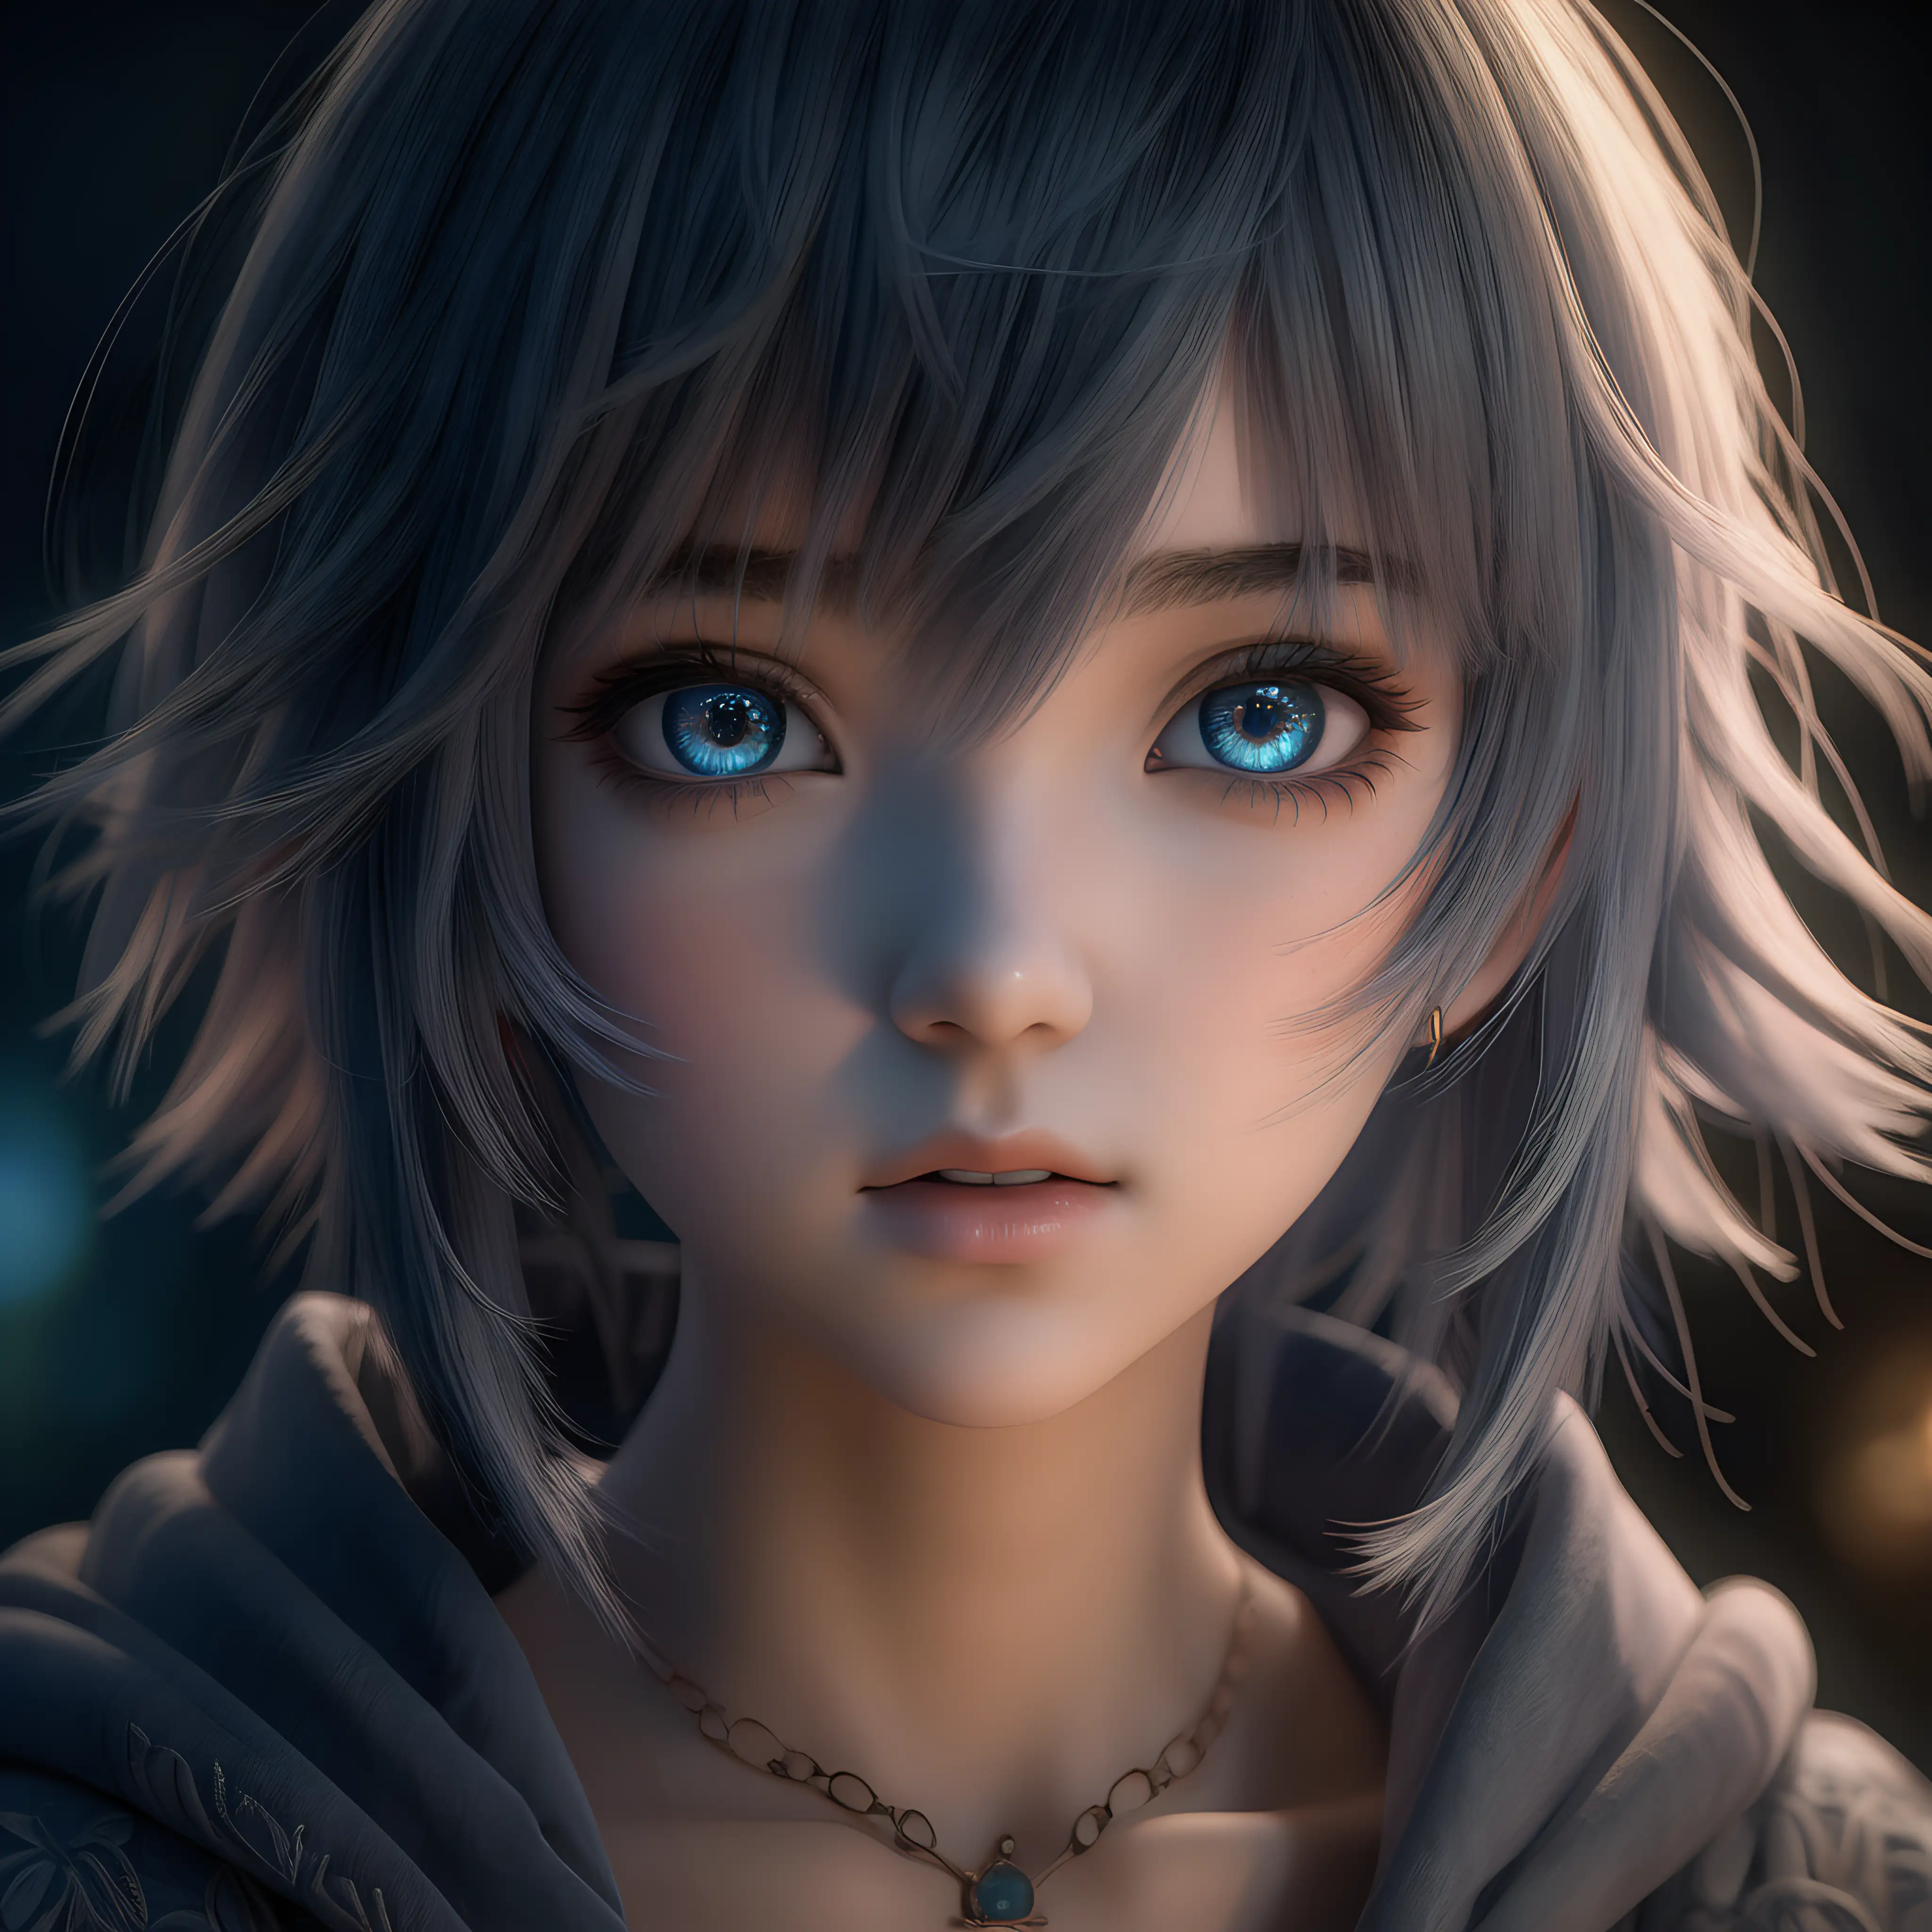 Enchanting Anime Girl Portrait with Soft Lighting and Moody Tones